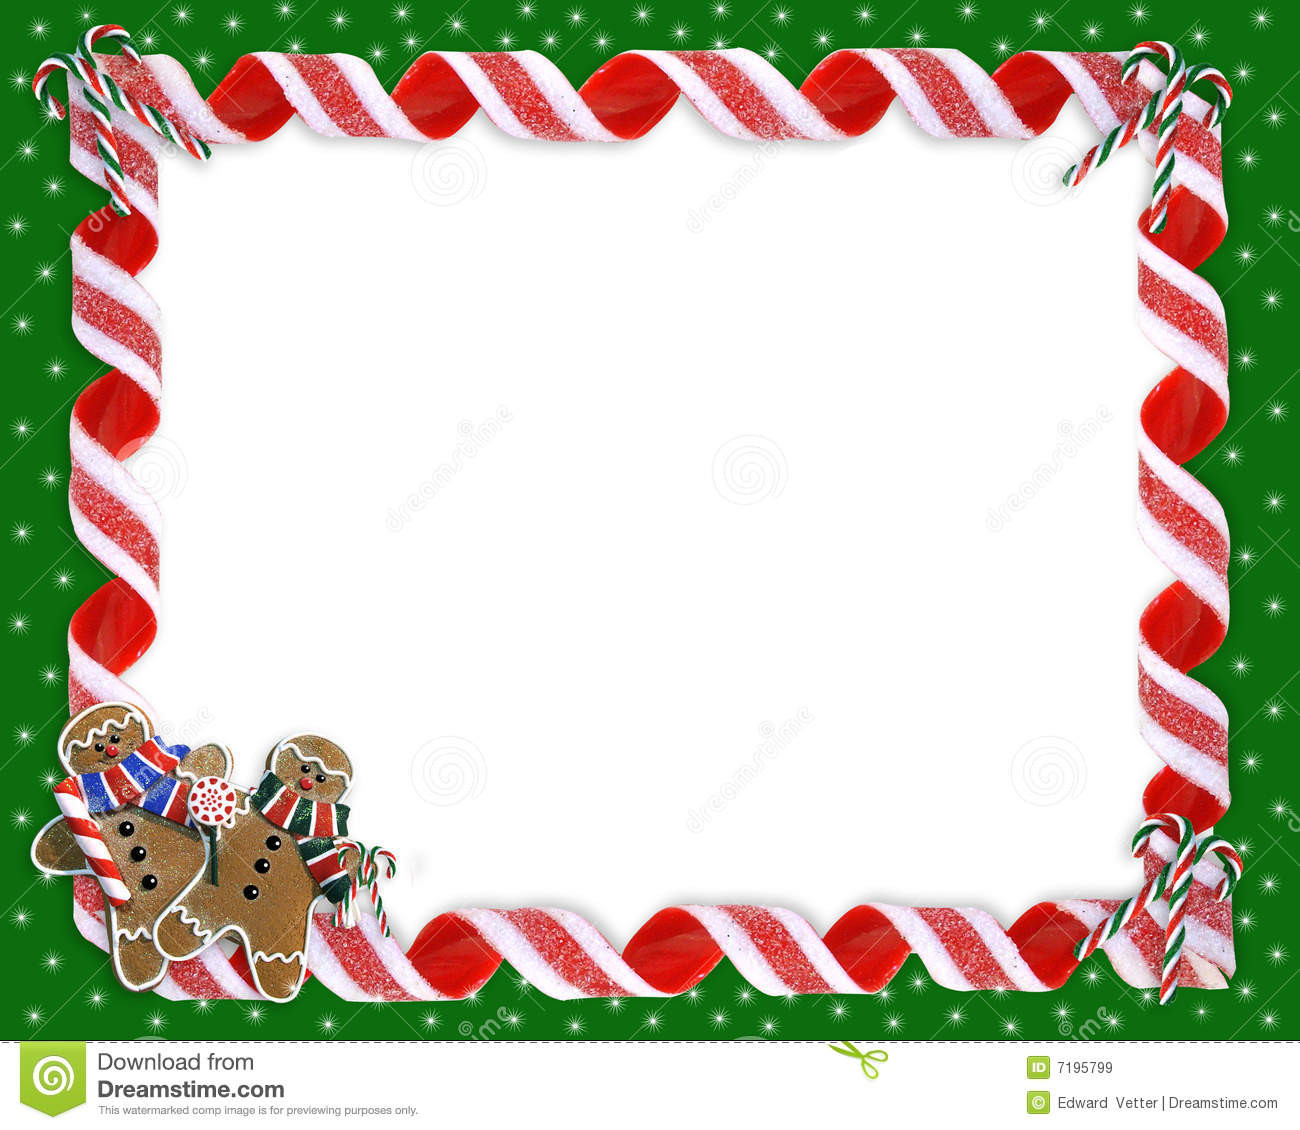 Christmas Candy Border
 Christmas Border Cookies And Candy Royalty Free Stock